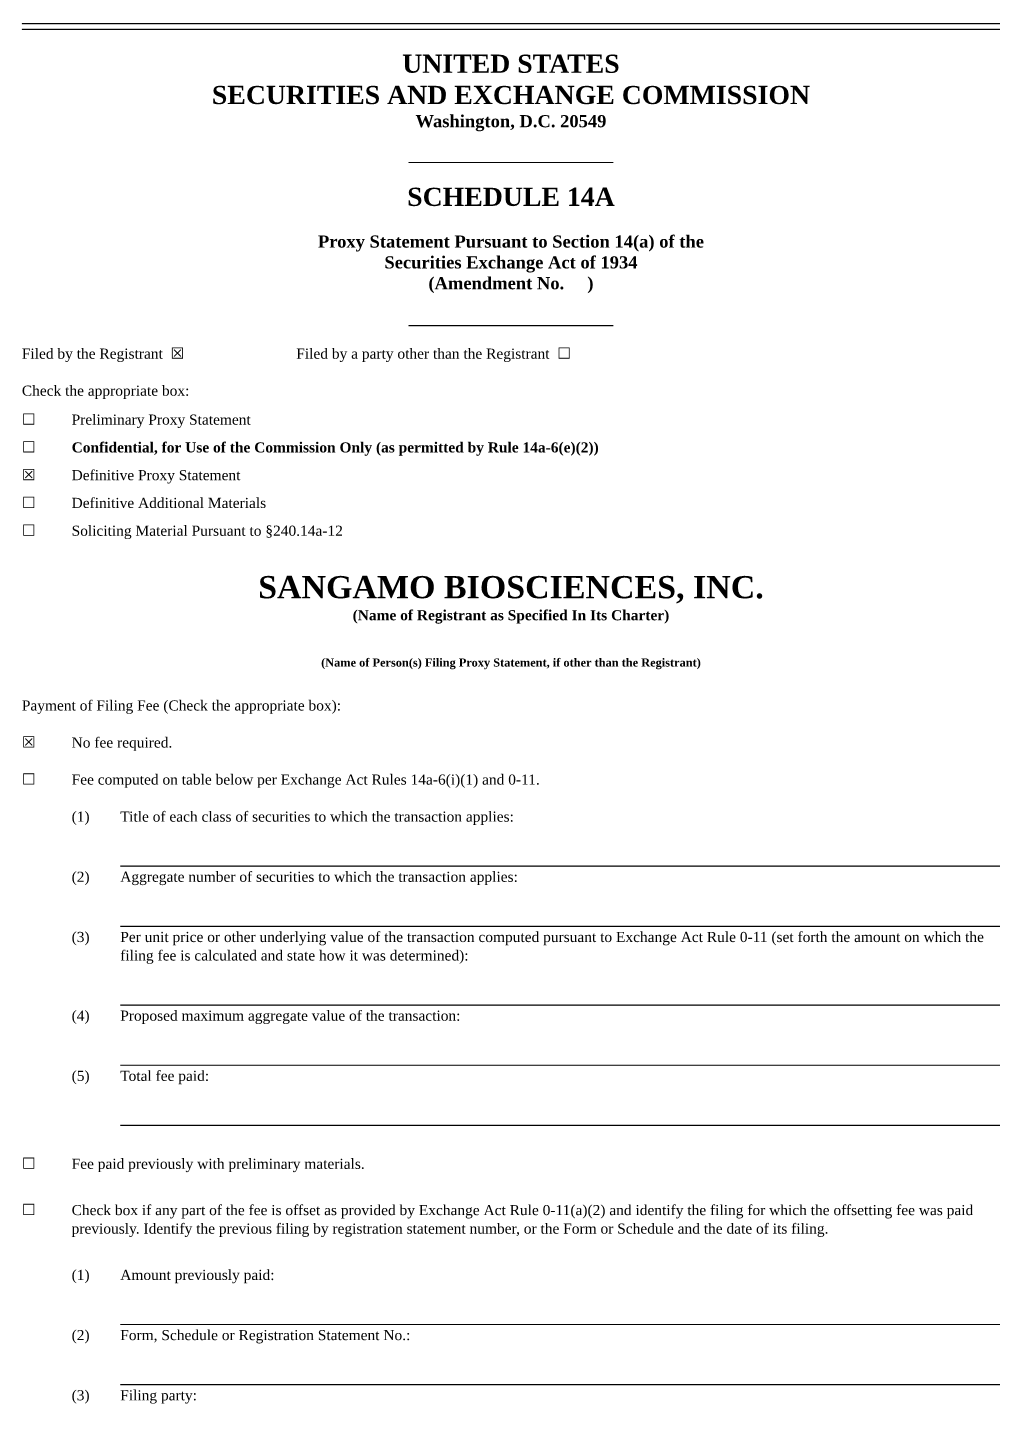 SANGAMO BIOSCIENCES, INC. (Name of Registrant As Specified in Its Charter)